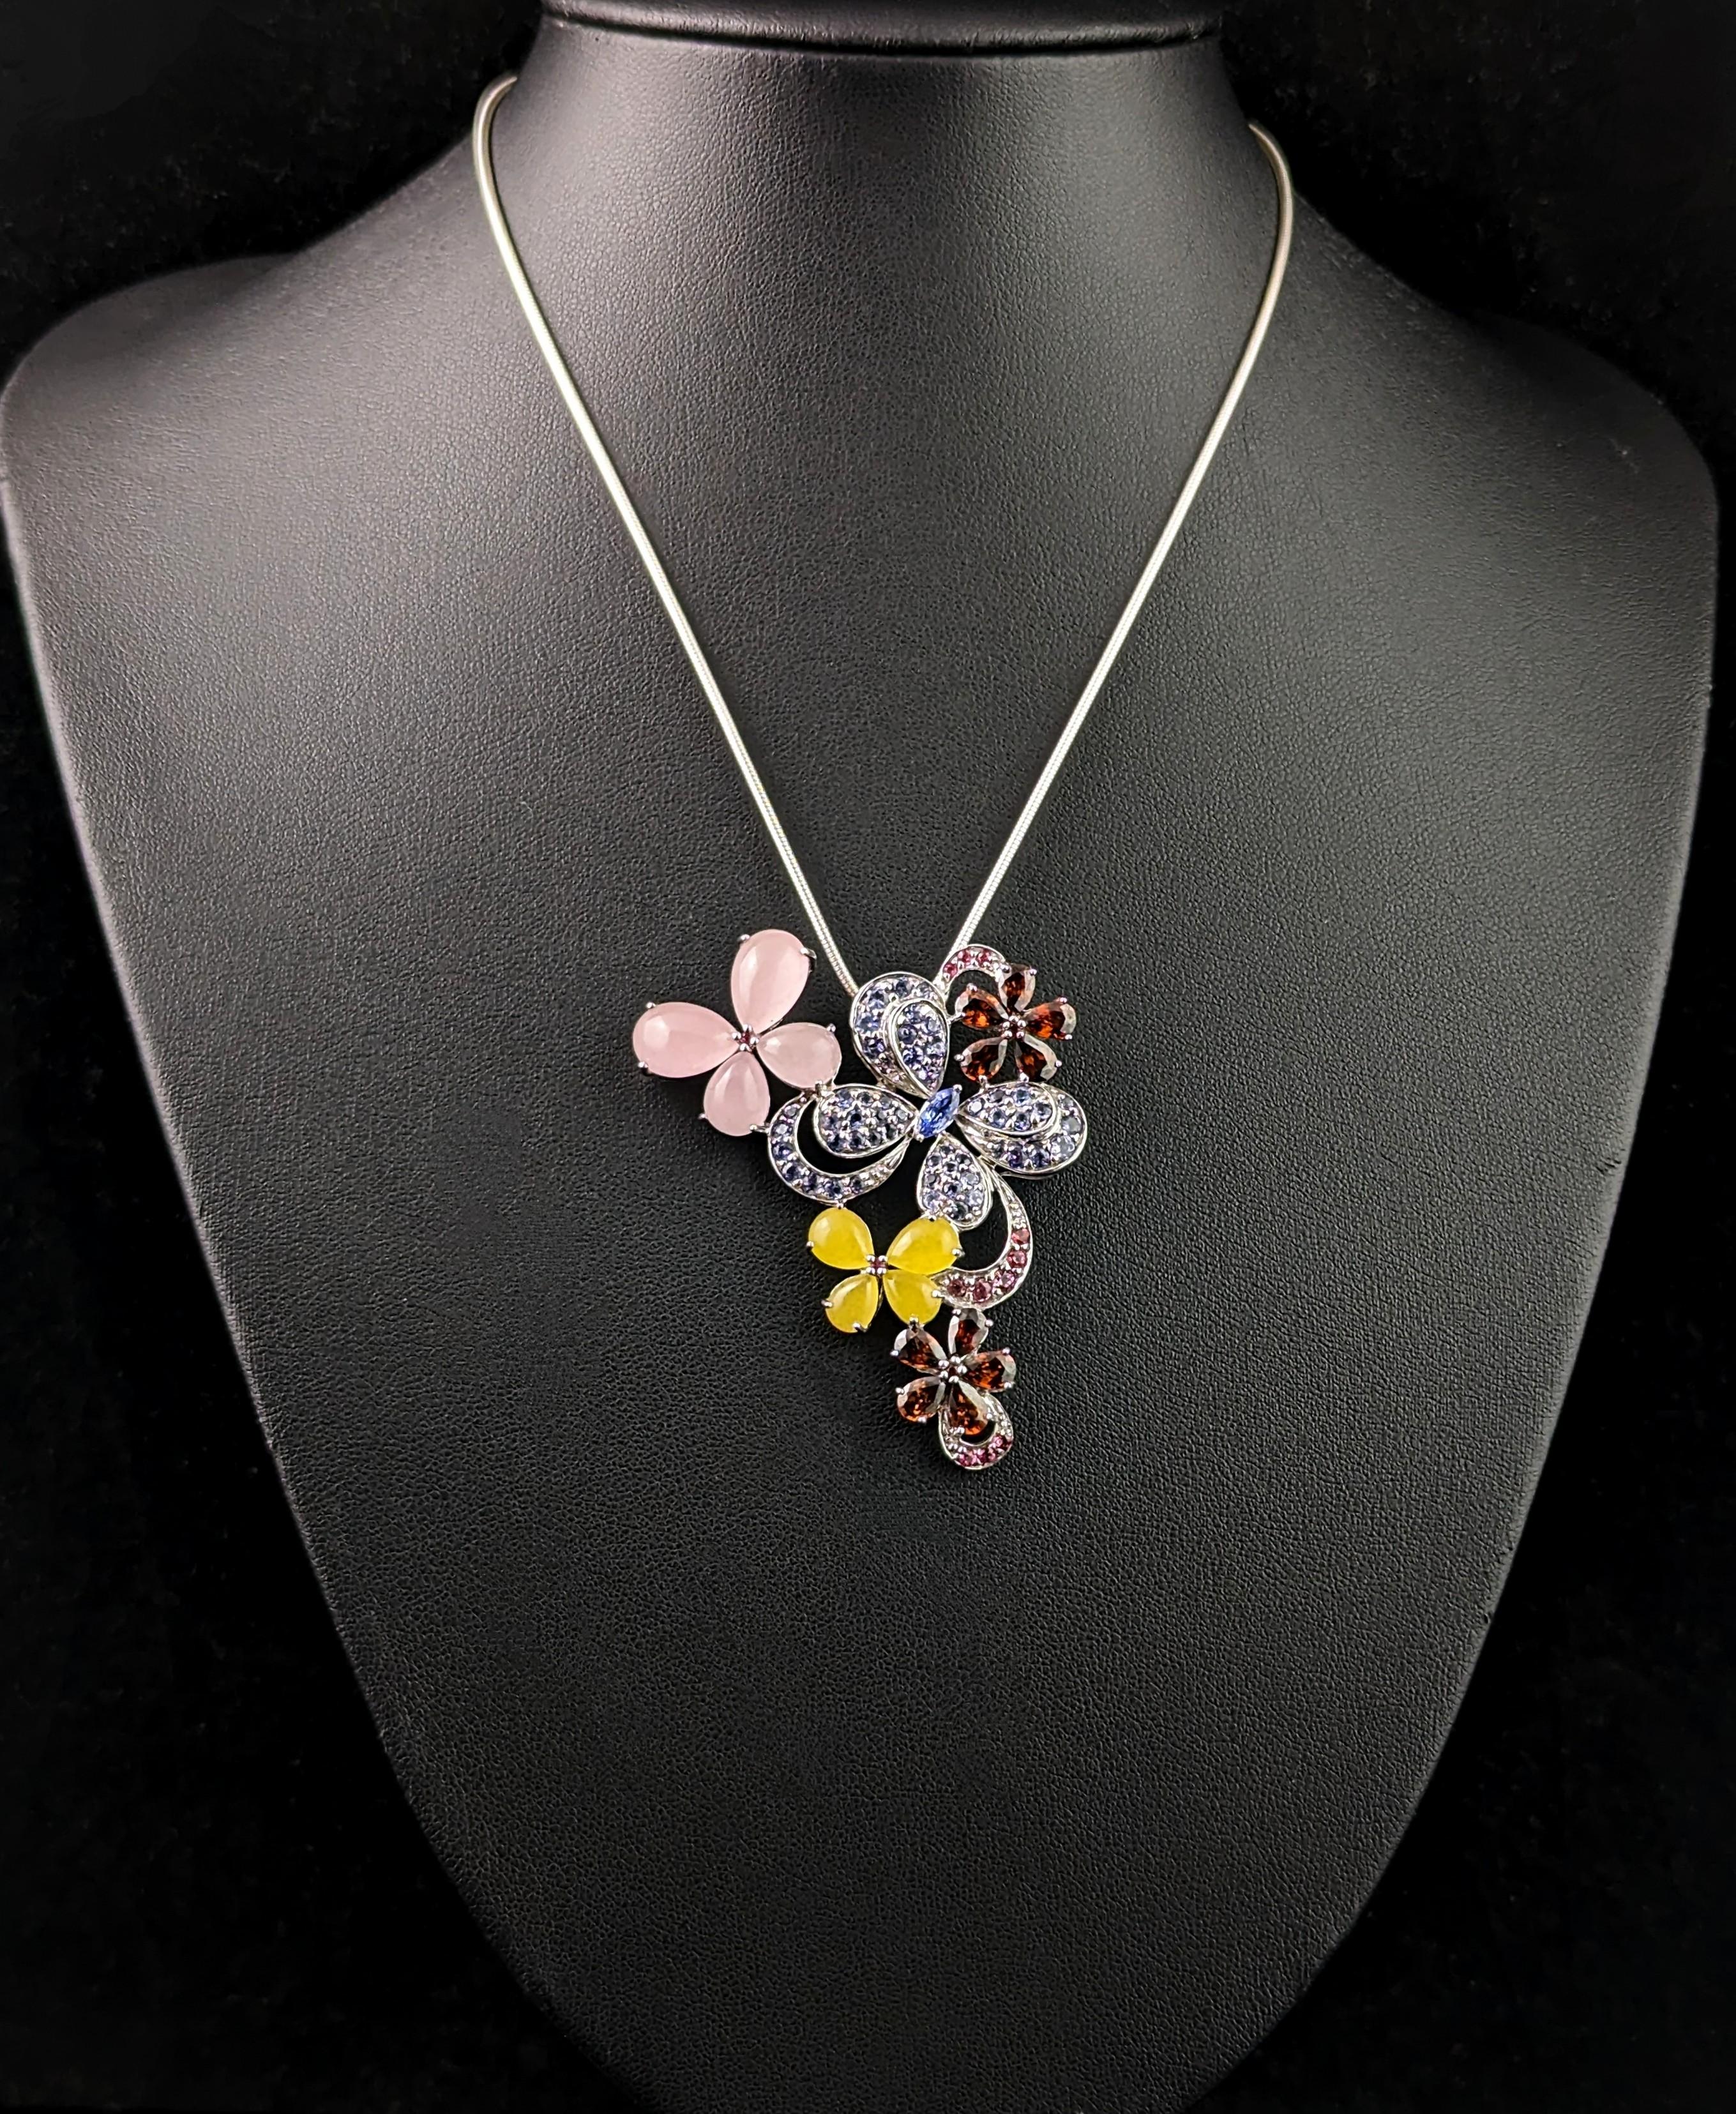 Vintage sterling silver and gem set pendant, Butterflies and Flowers necklace For Sale 2